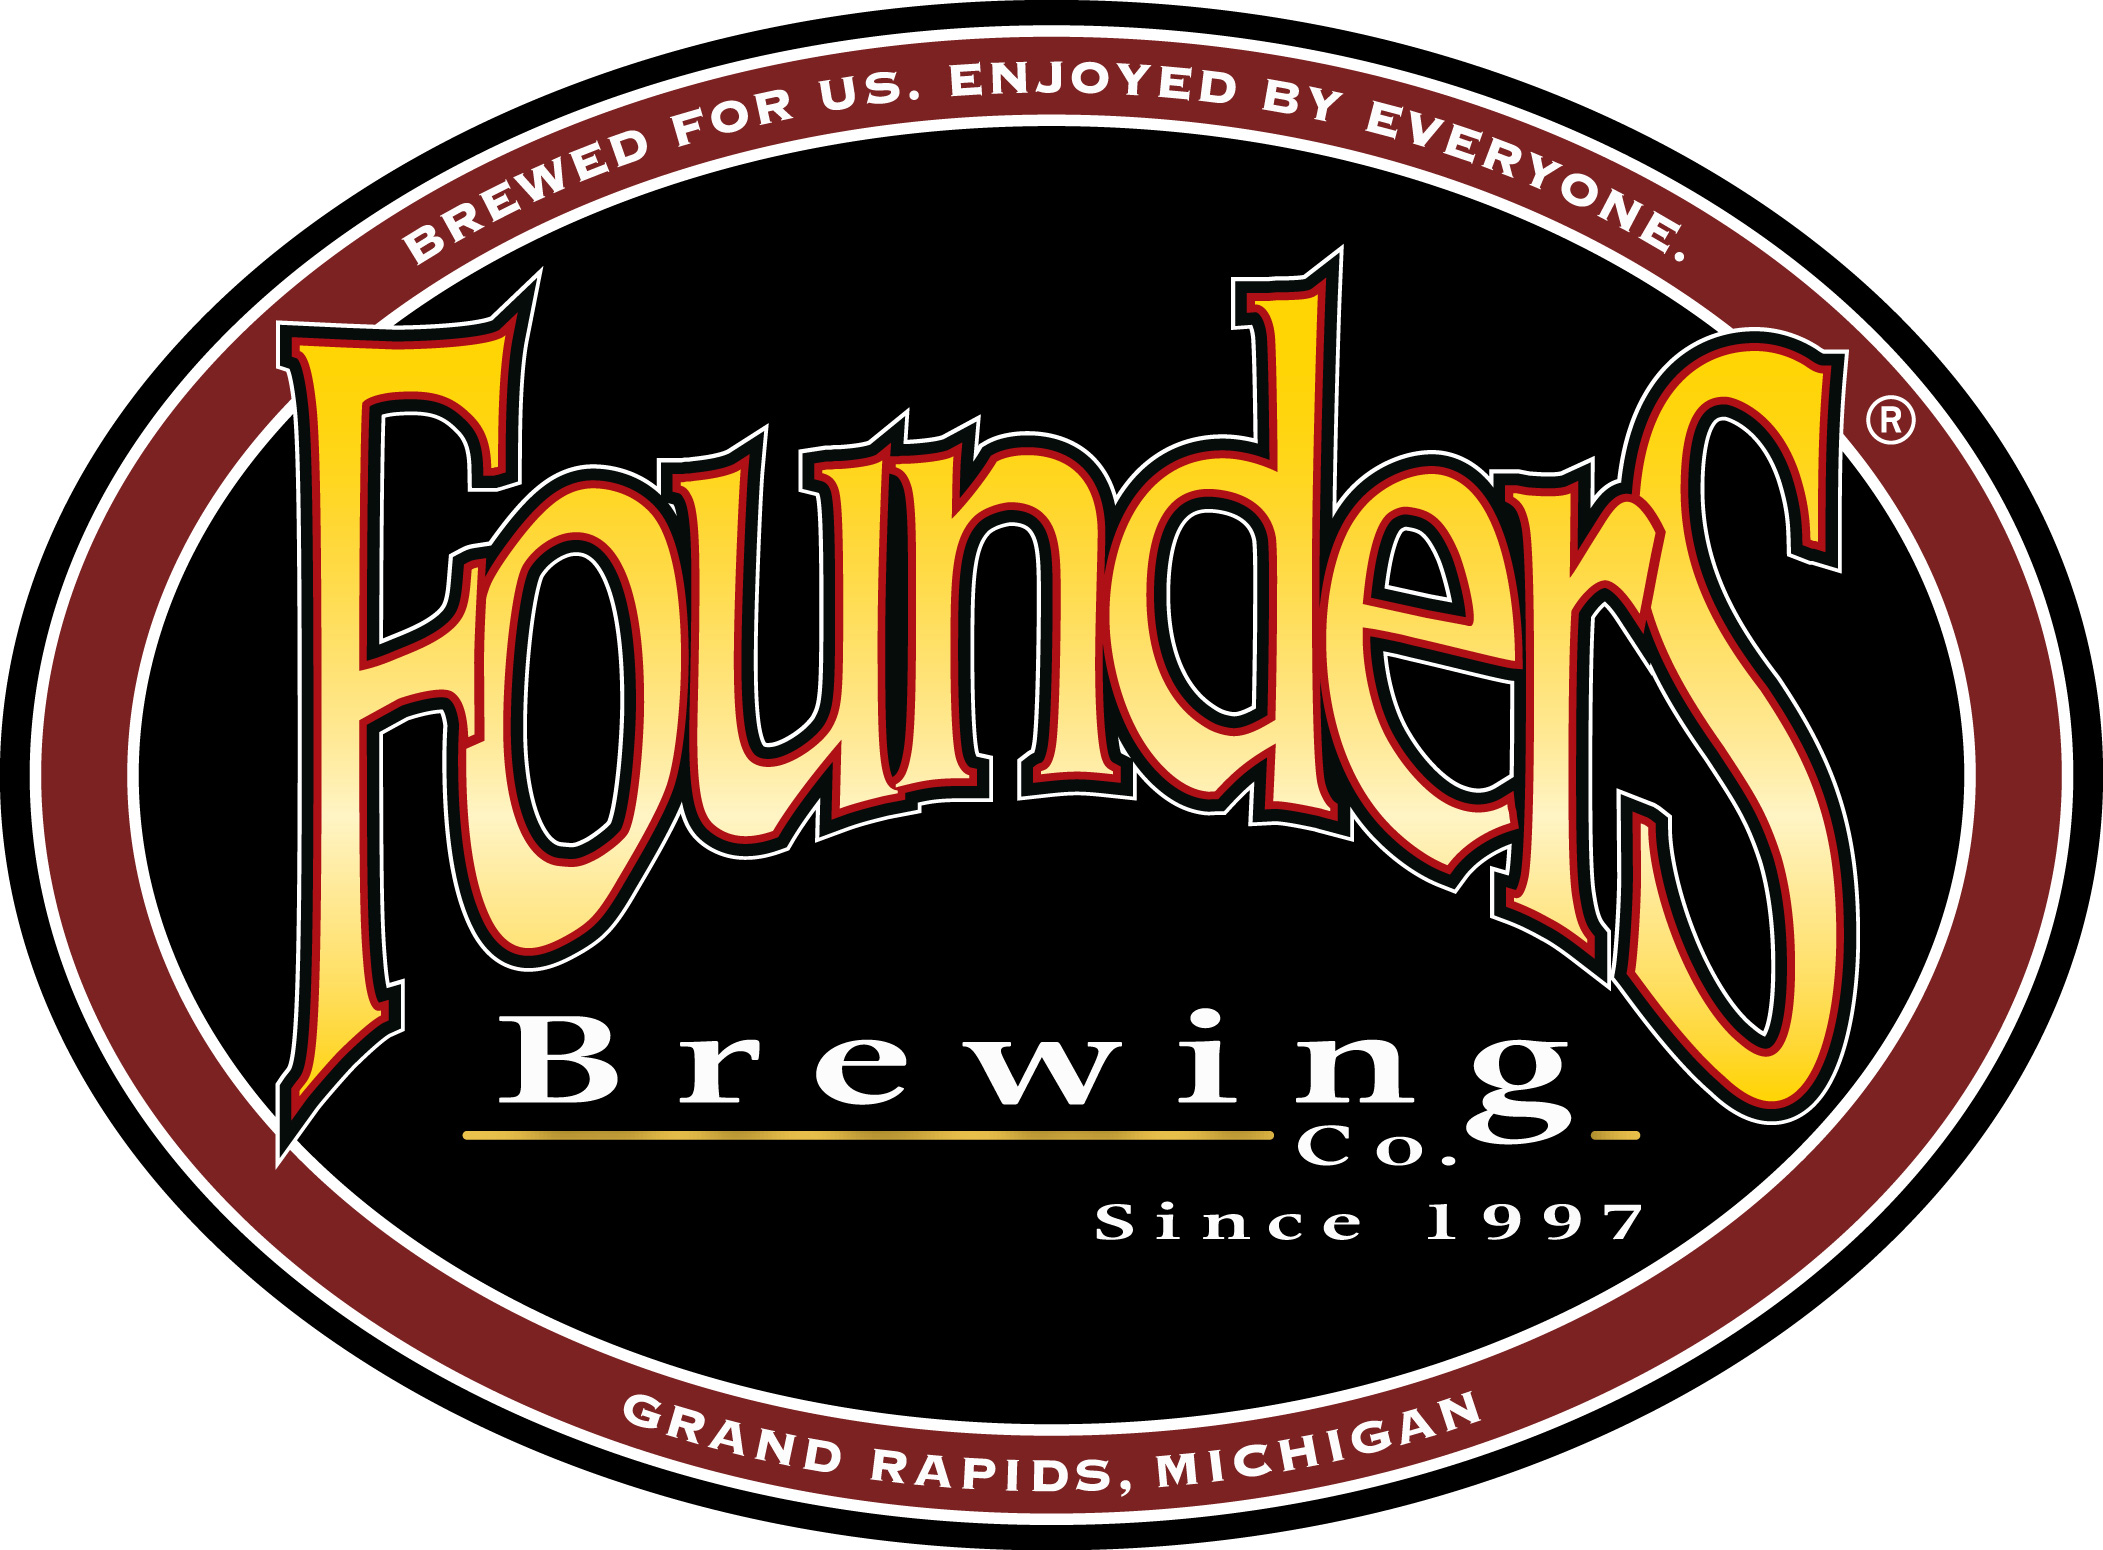 Founders Brewery Logo